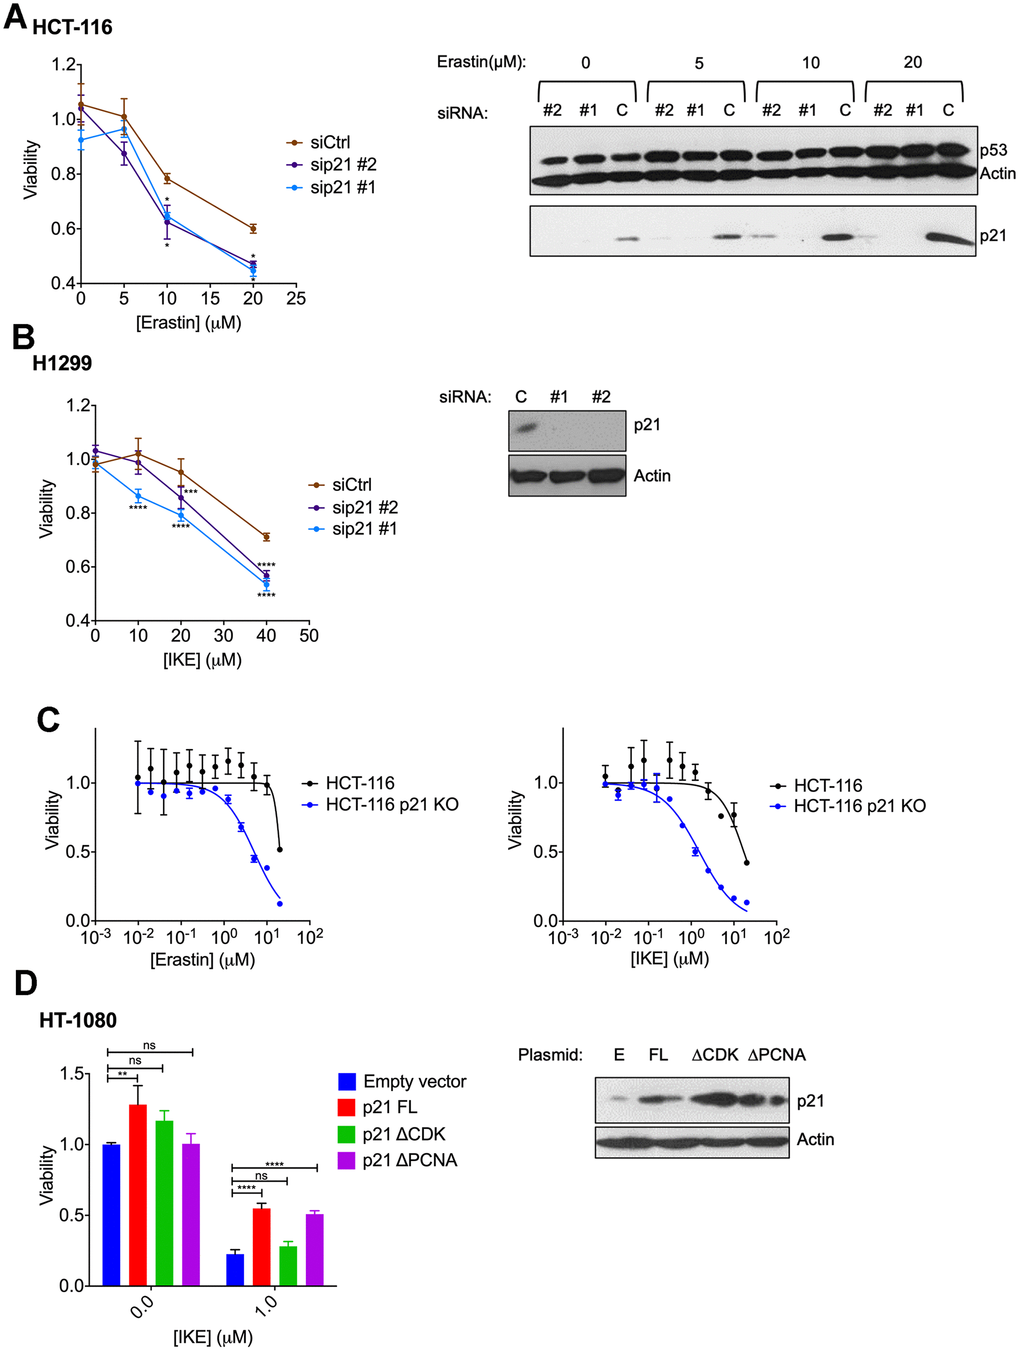 Altering p21 protein levels changes the sensitivity of cells to ferroptosis. (A, B) HCT116 (A) or H1299 (B) cells were transfected with two different siRNAs (#1, #2) directed against p21 mRNA for 24 hours, and then treated with erastin or IKE as indicated for an additional 48 hours. As a control, cells were transfected with luciferase siRNA a (siCtrl/C). The right panels in A and B show the corresponding changes in p21 protein levels. (C) HCT-116 cells and HCT116 p21 (-/-) cells were treated with increasing doses of either erastin (left panel) or IKE (right panel) for 48 hours. (D) Left panel: Viability of HT-1080 cells that were transfected with the indicated plasmids expressing p21 variants or an empty vector and then treated with either DMSO or IKE for 48 hours. The panel on the right shows the corresponding immunoblot detecting p21 protein levels. The data in (A, B) represent the mean ± SE for two of three independent experiments, in (C) represent the mean ± SE for two out of four independent experiments, in (D) represent the mean ± SE for three independent experiments. The viability data have been normalized to the DMSO control in (A–C) and to their respective untreated control in (D).